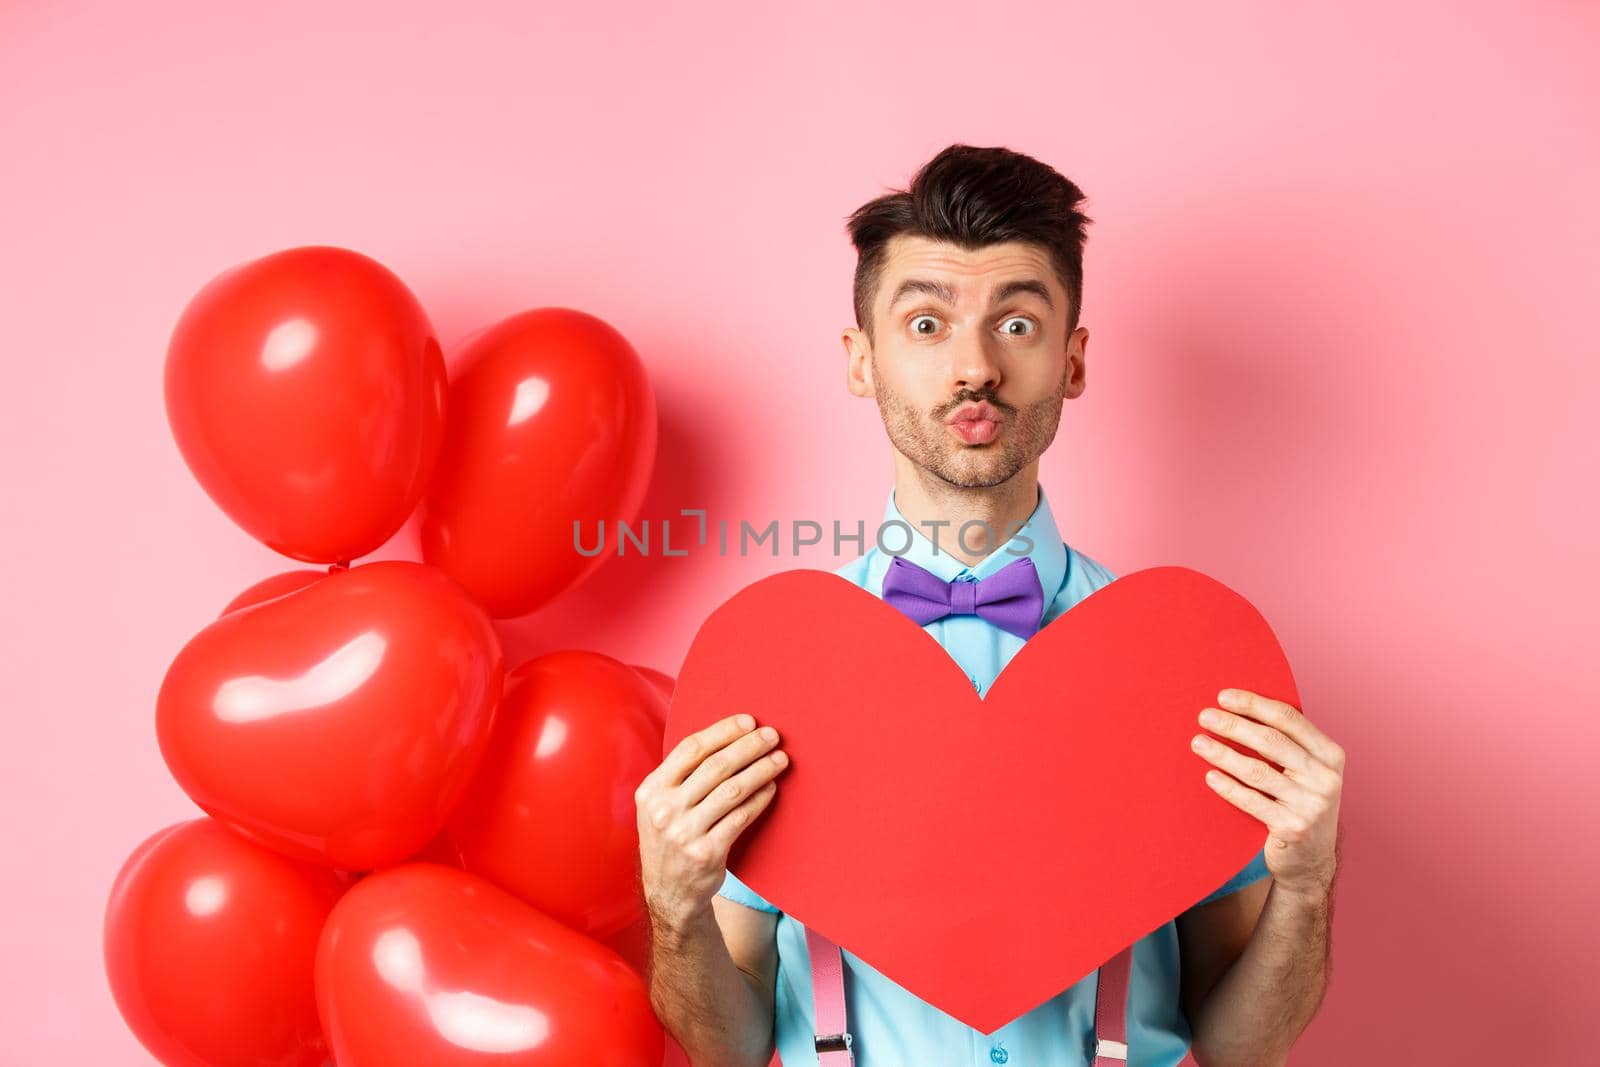 Valentines day concept. Cute guy pucker lips for kiss and showing romantic heart cutout, falling in love, standing over pink background.